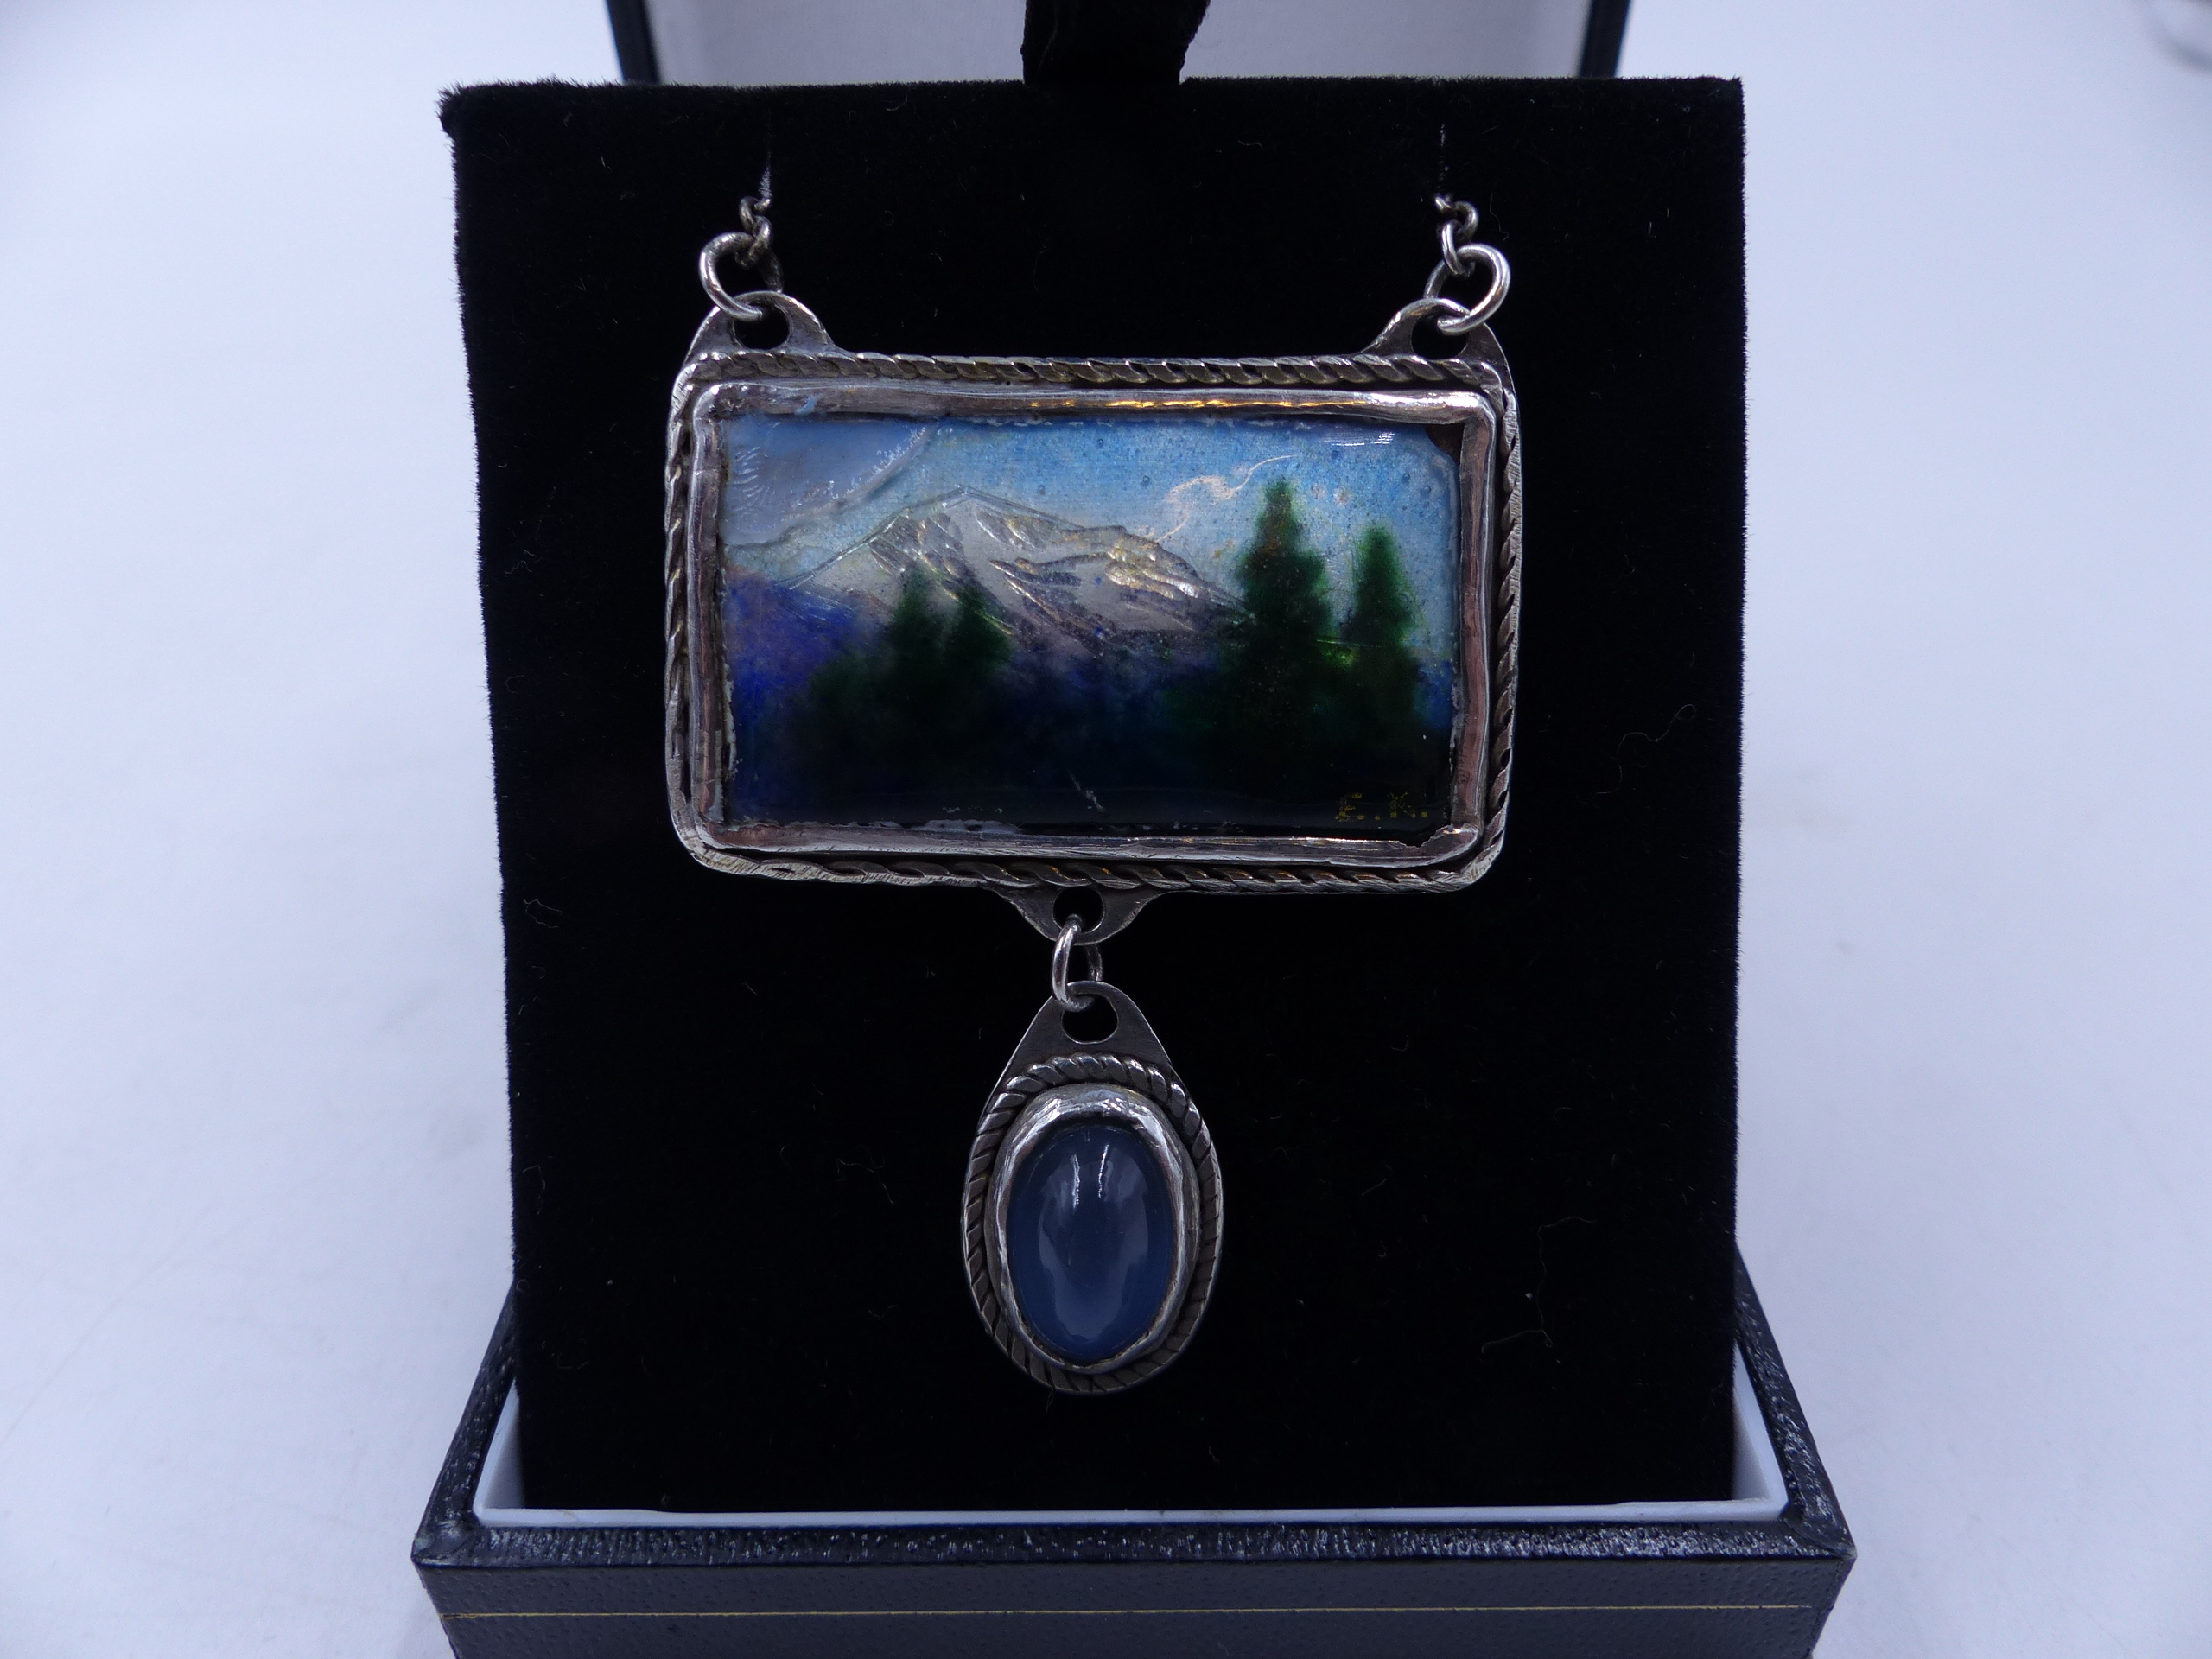 AN ARTS AND CRAFTS STYLE ENAMELLED PENDANT, THE CENTRAL RECTANGLE ENAMEL IS A MOUNTAIN LANDSCAPE - Image 2 of 15